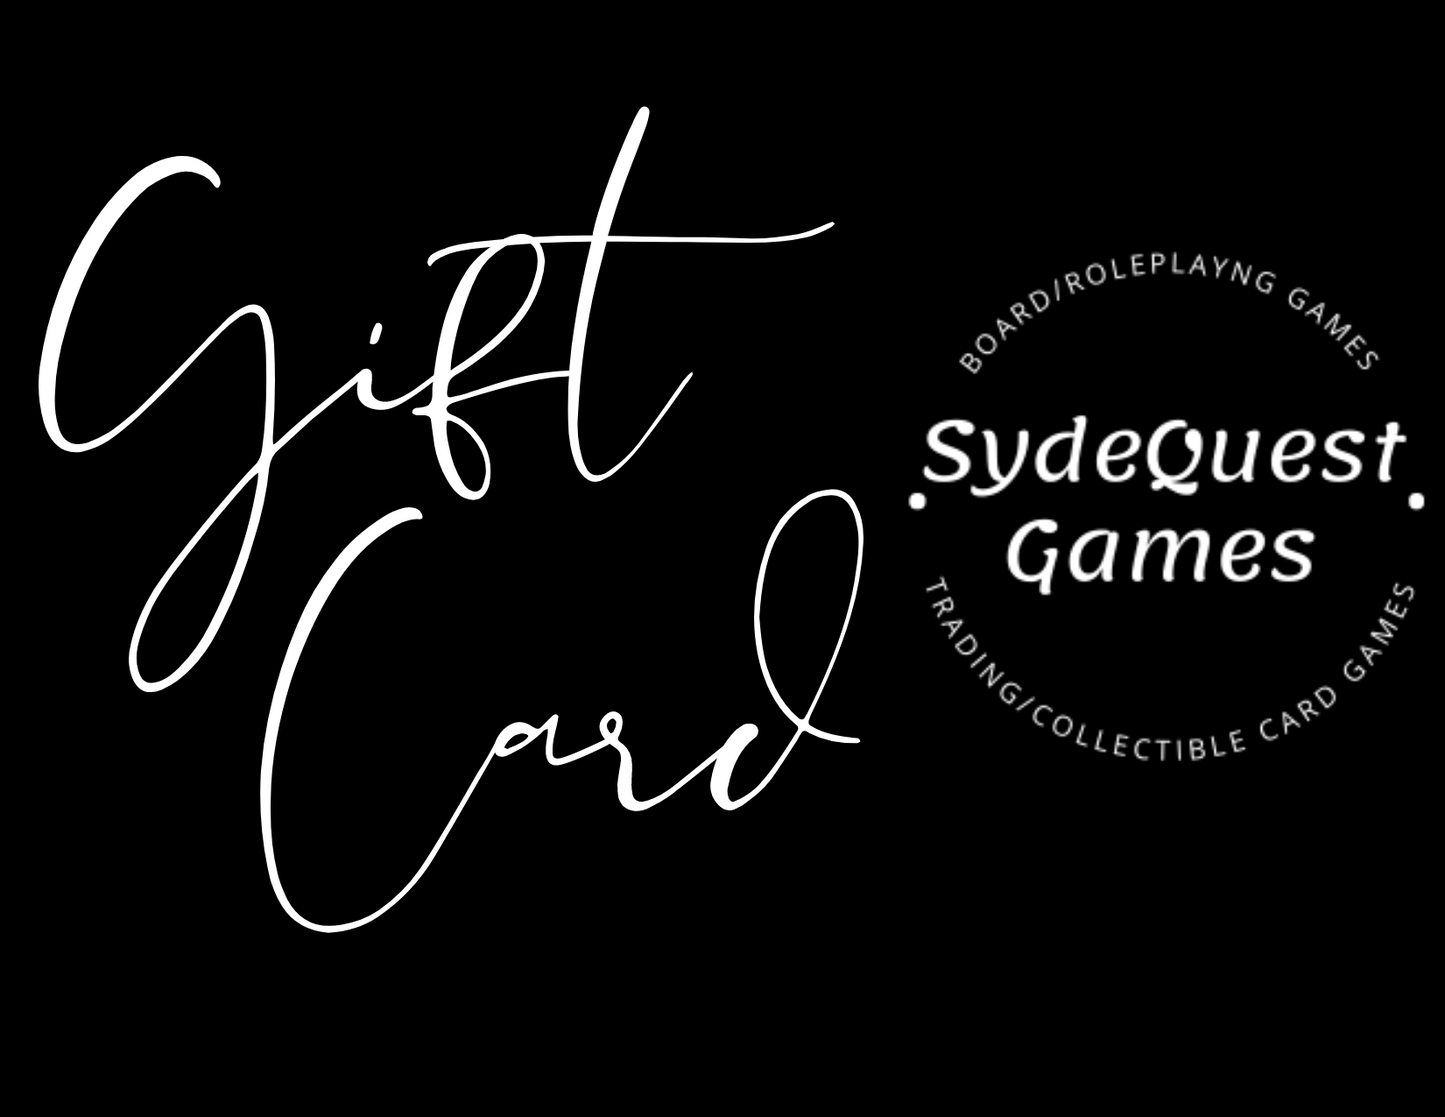 SydeQuest Games Gift Card!